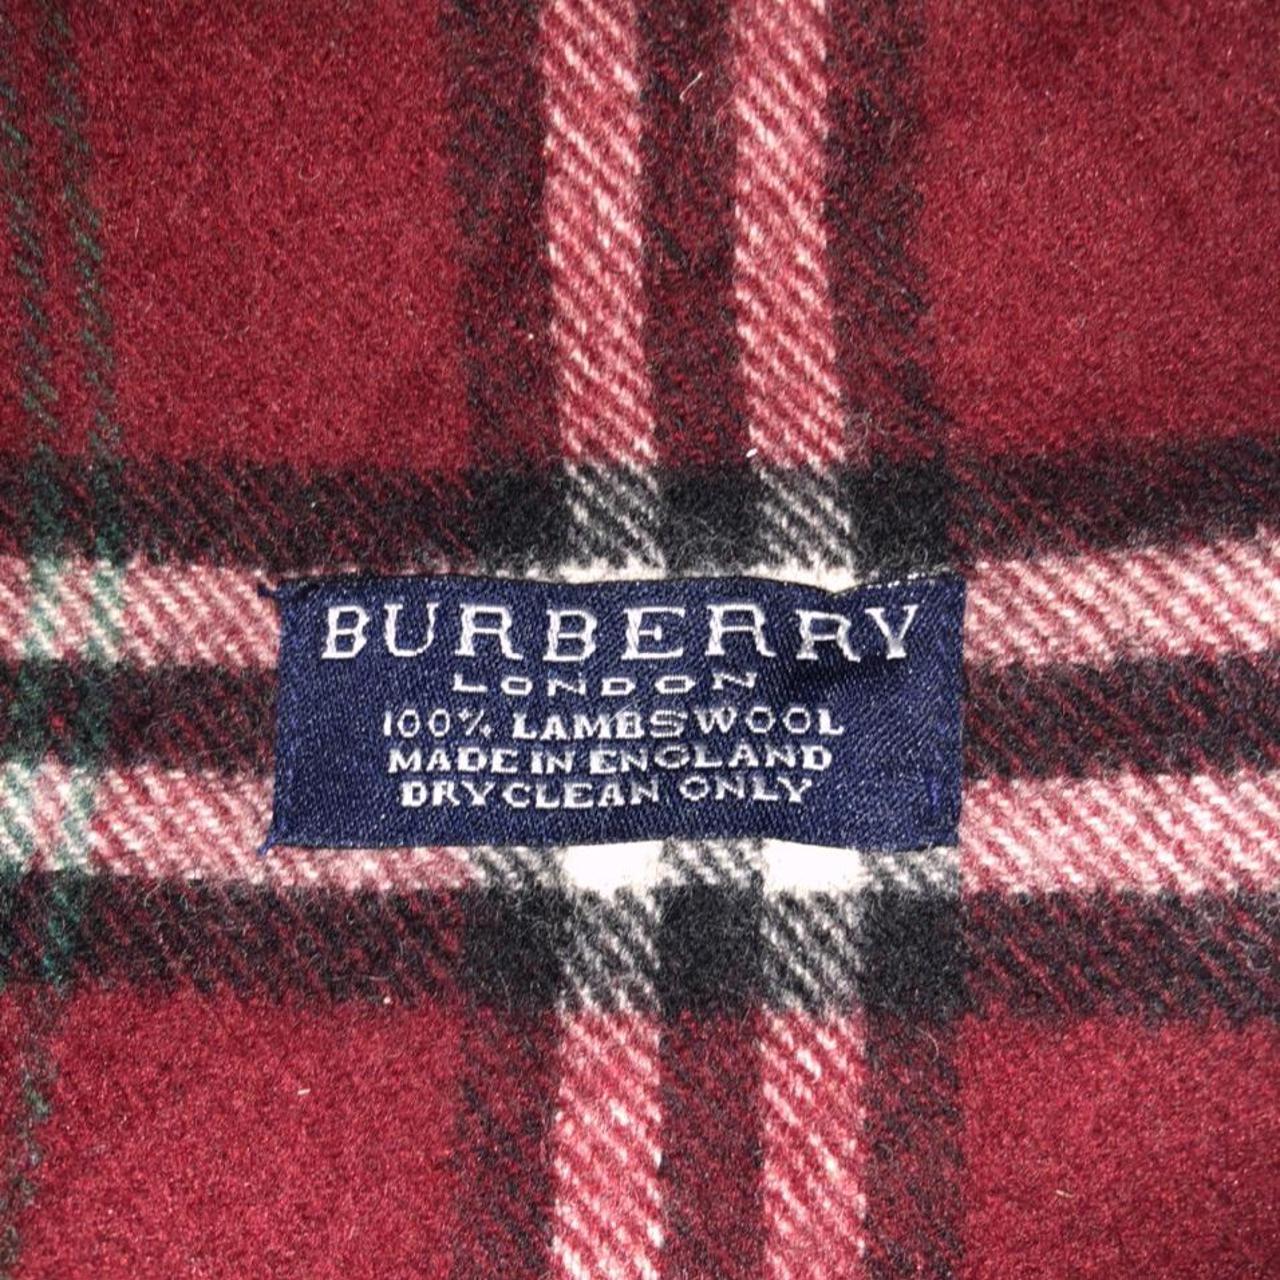 Vintage Burberry scarf 100% Lambswool Labels all... - Depop